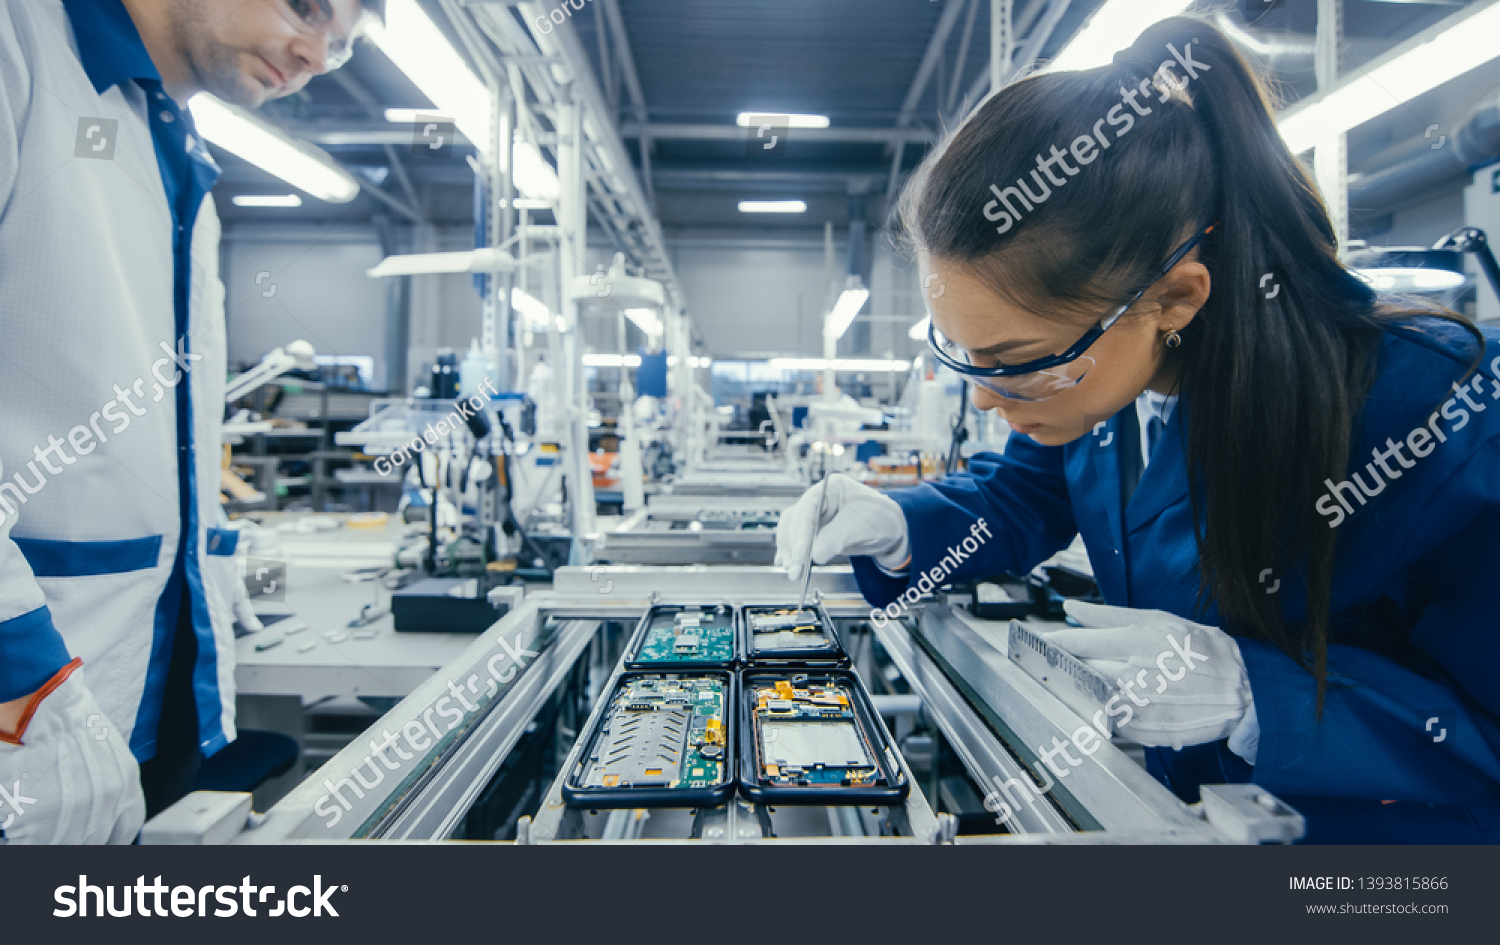 Shot of an Electronics Factory Workers Assembling Circuit Boards by Hand While it Stands on the Assembly Line. High Tech Factory Facility. #1393815866